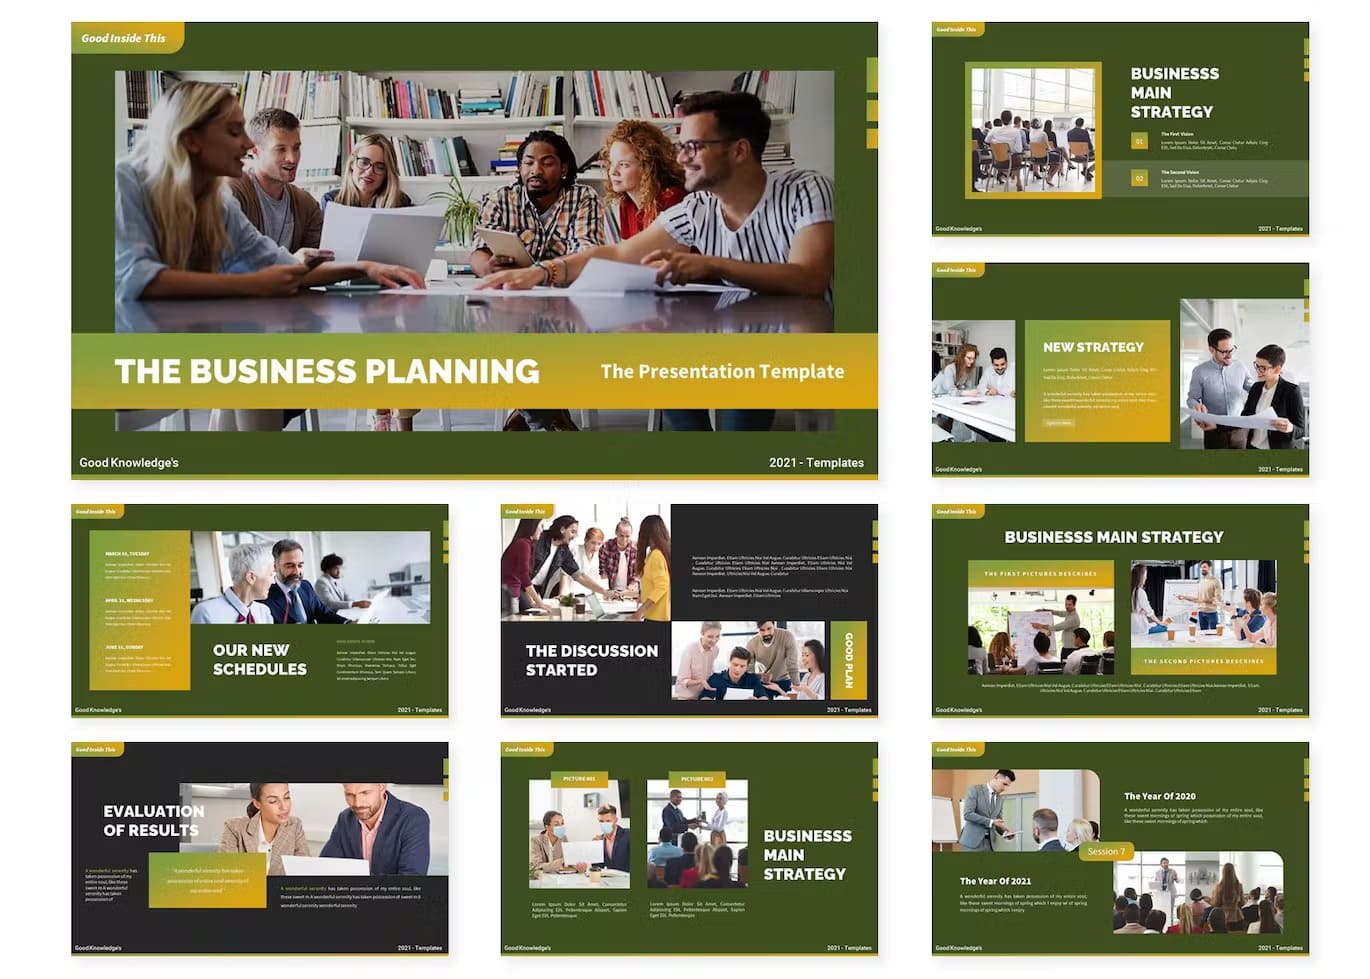 Google Slides for business planning: The business planning, business main strategy, new strategy, evaluation of results.